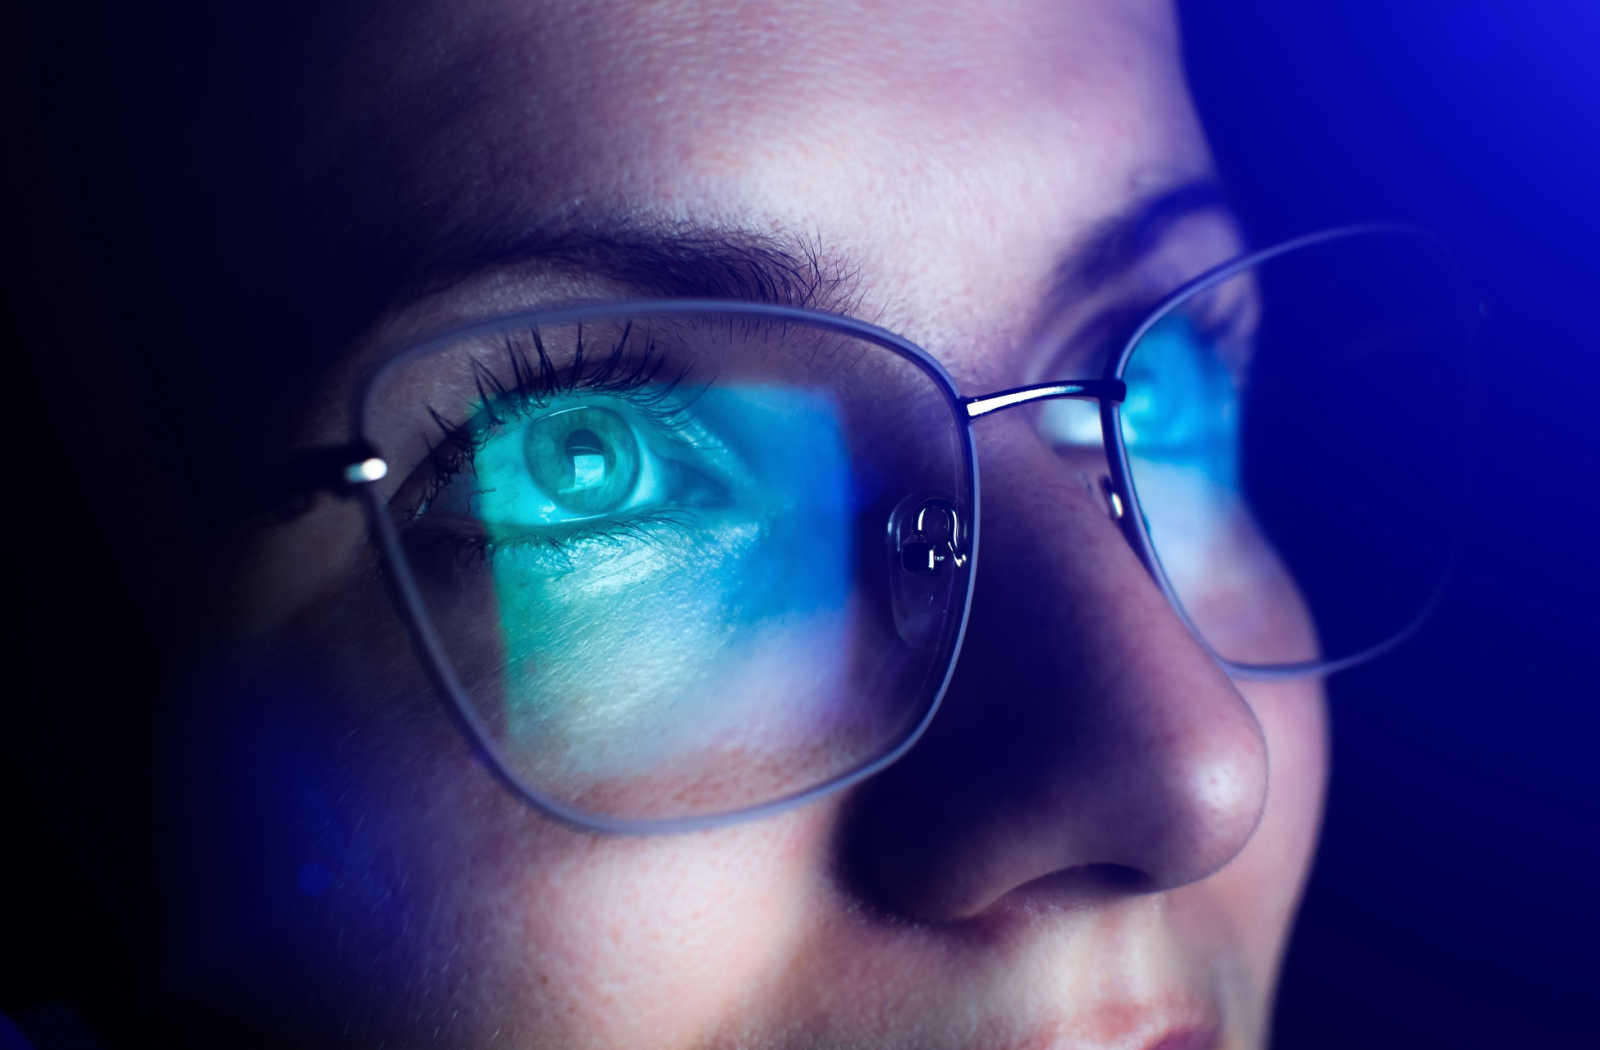 What happens if you wear blue light glasses too much?